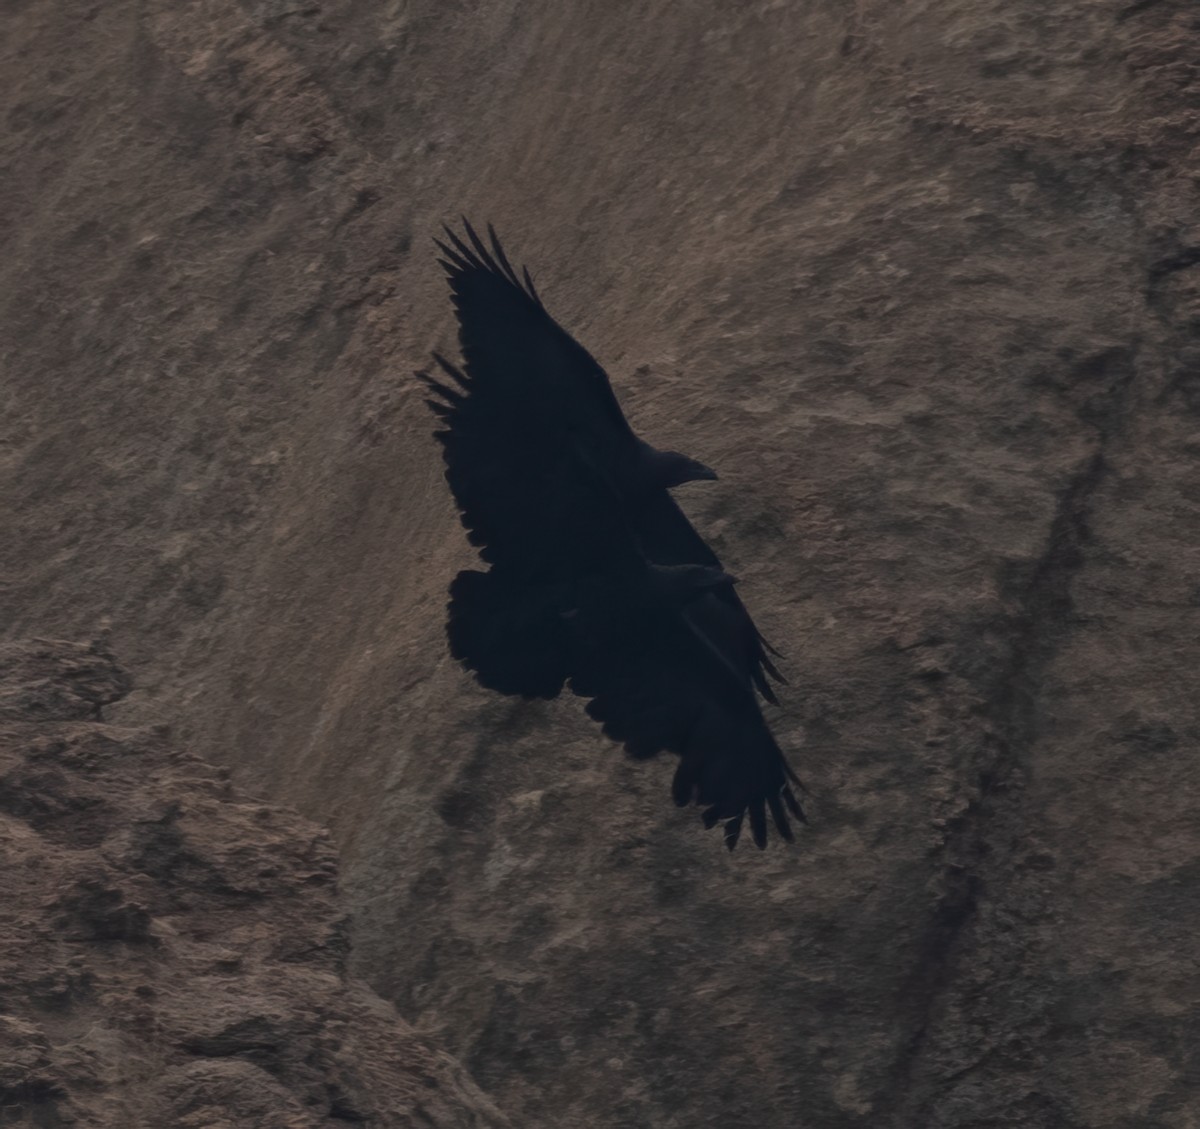 Fan-tailed Raven - Mohannad Baghlaf